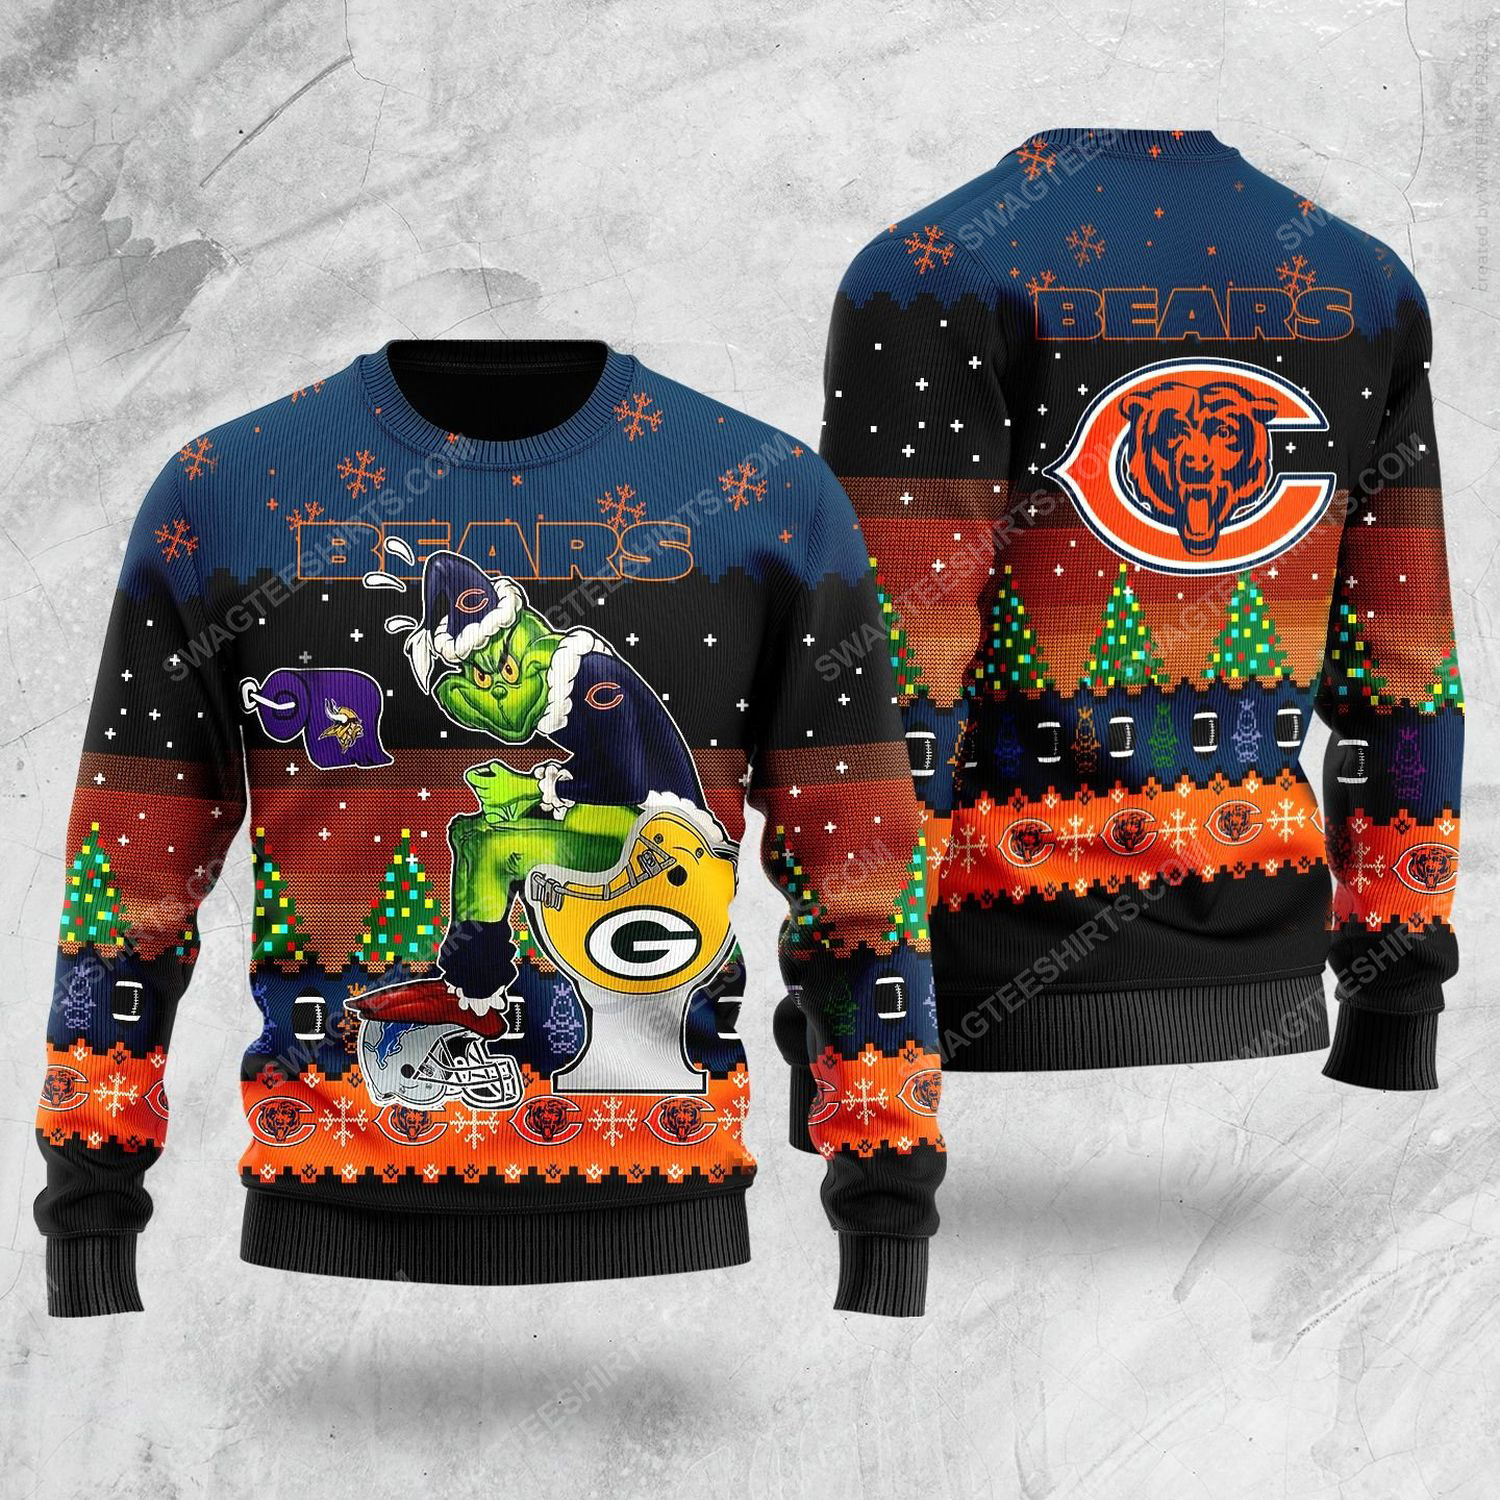 quality] The grinch bay packers ugly christmas sweater